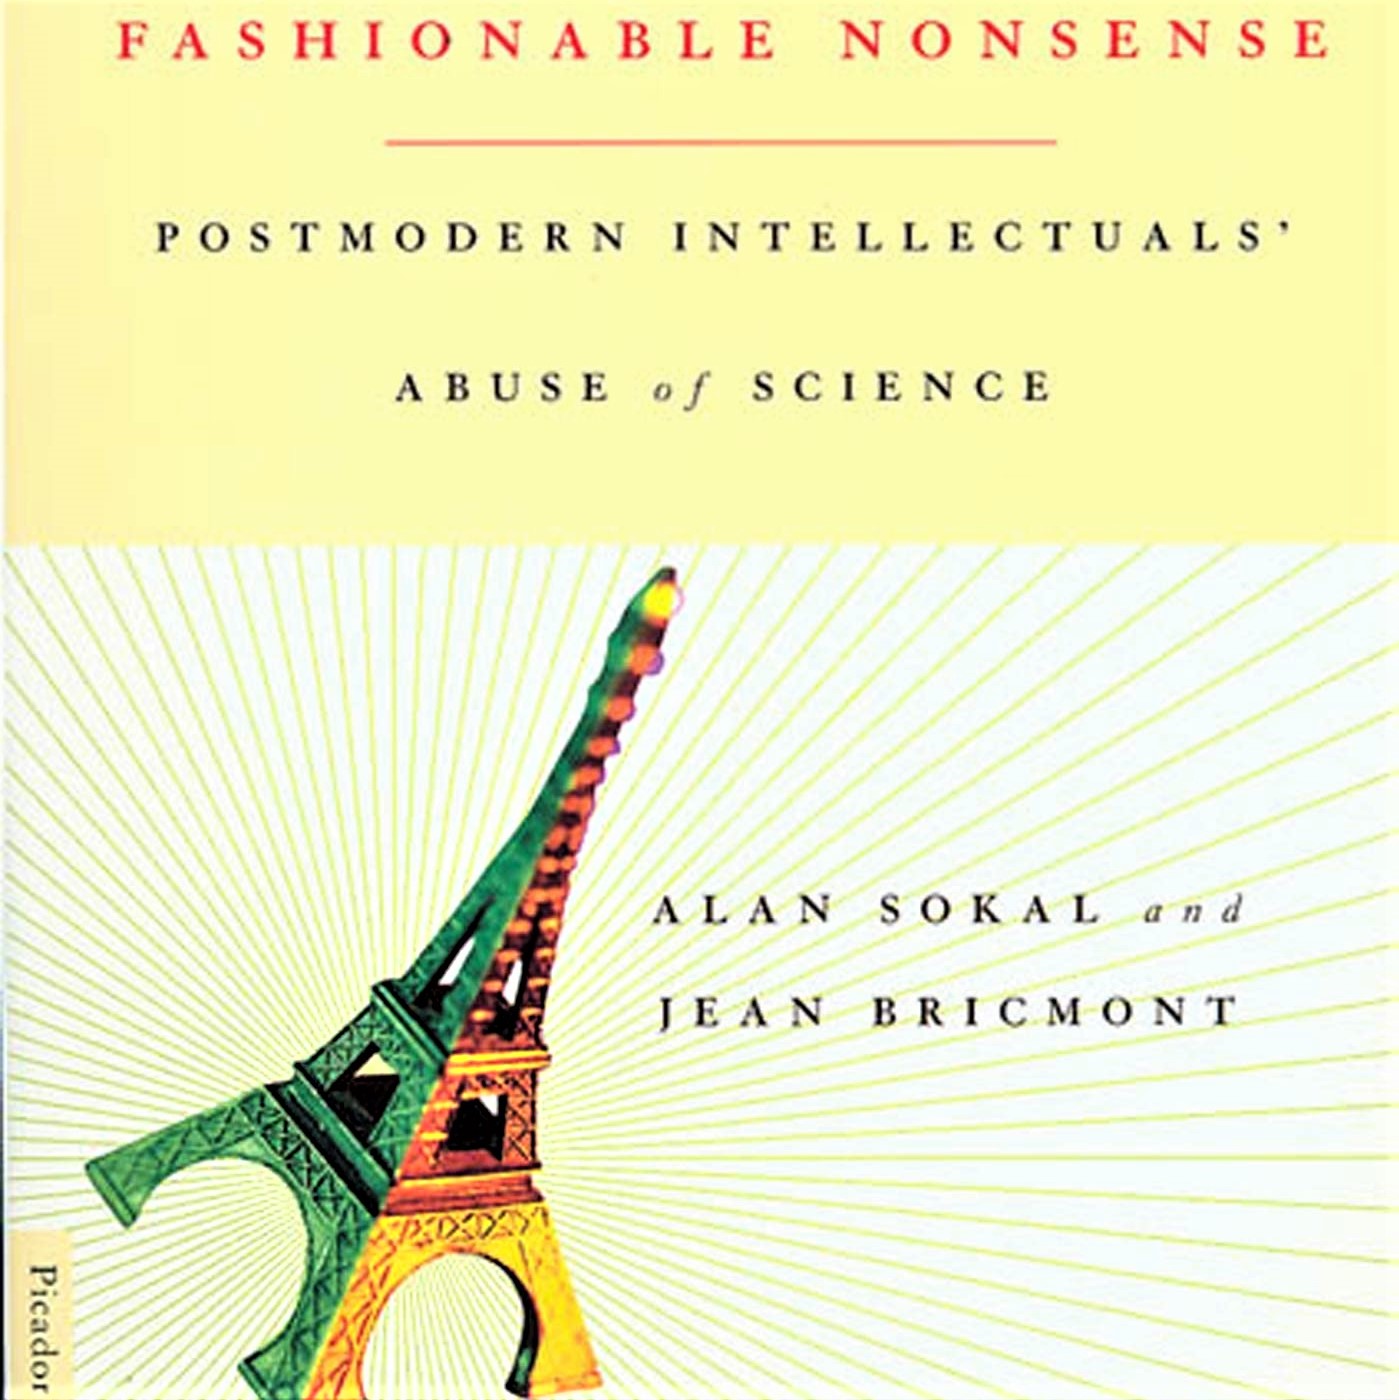 Cover image for the book 'Fashionable Nonsense'